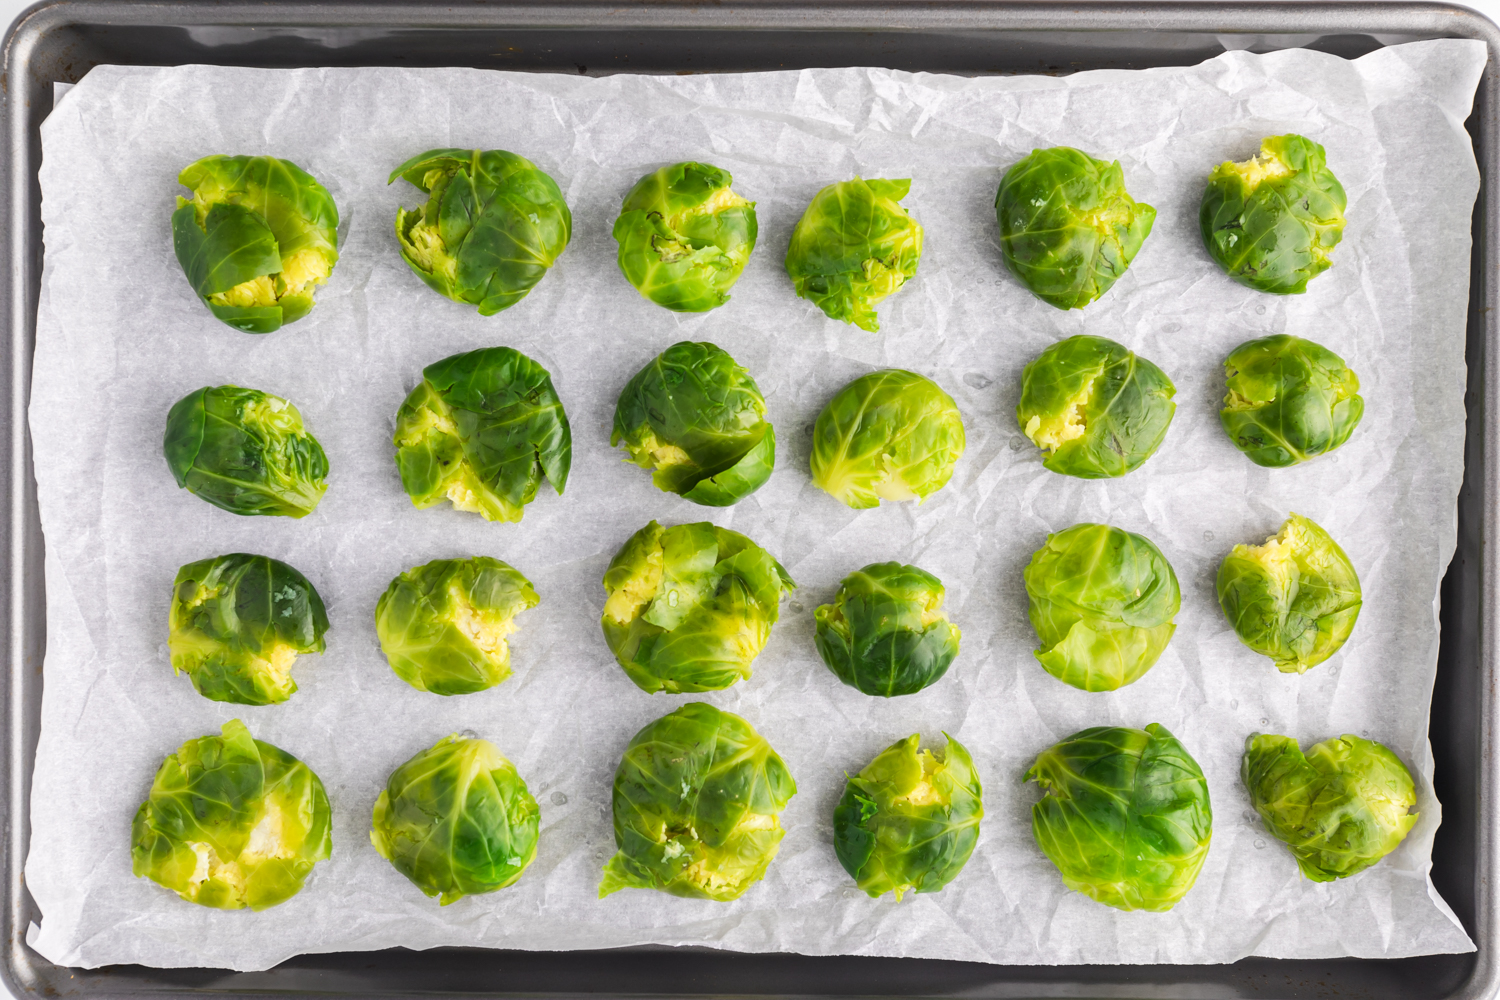 Whole Brussels sprouts on a sheet pan, after being smashed down and flattened slightly.